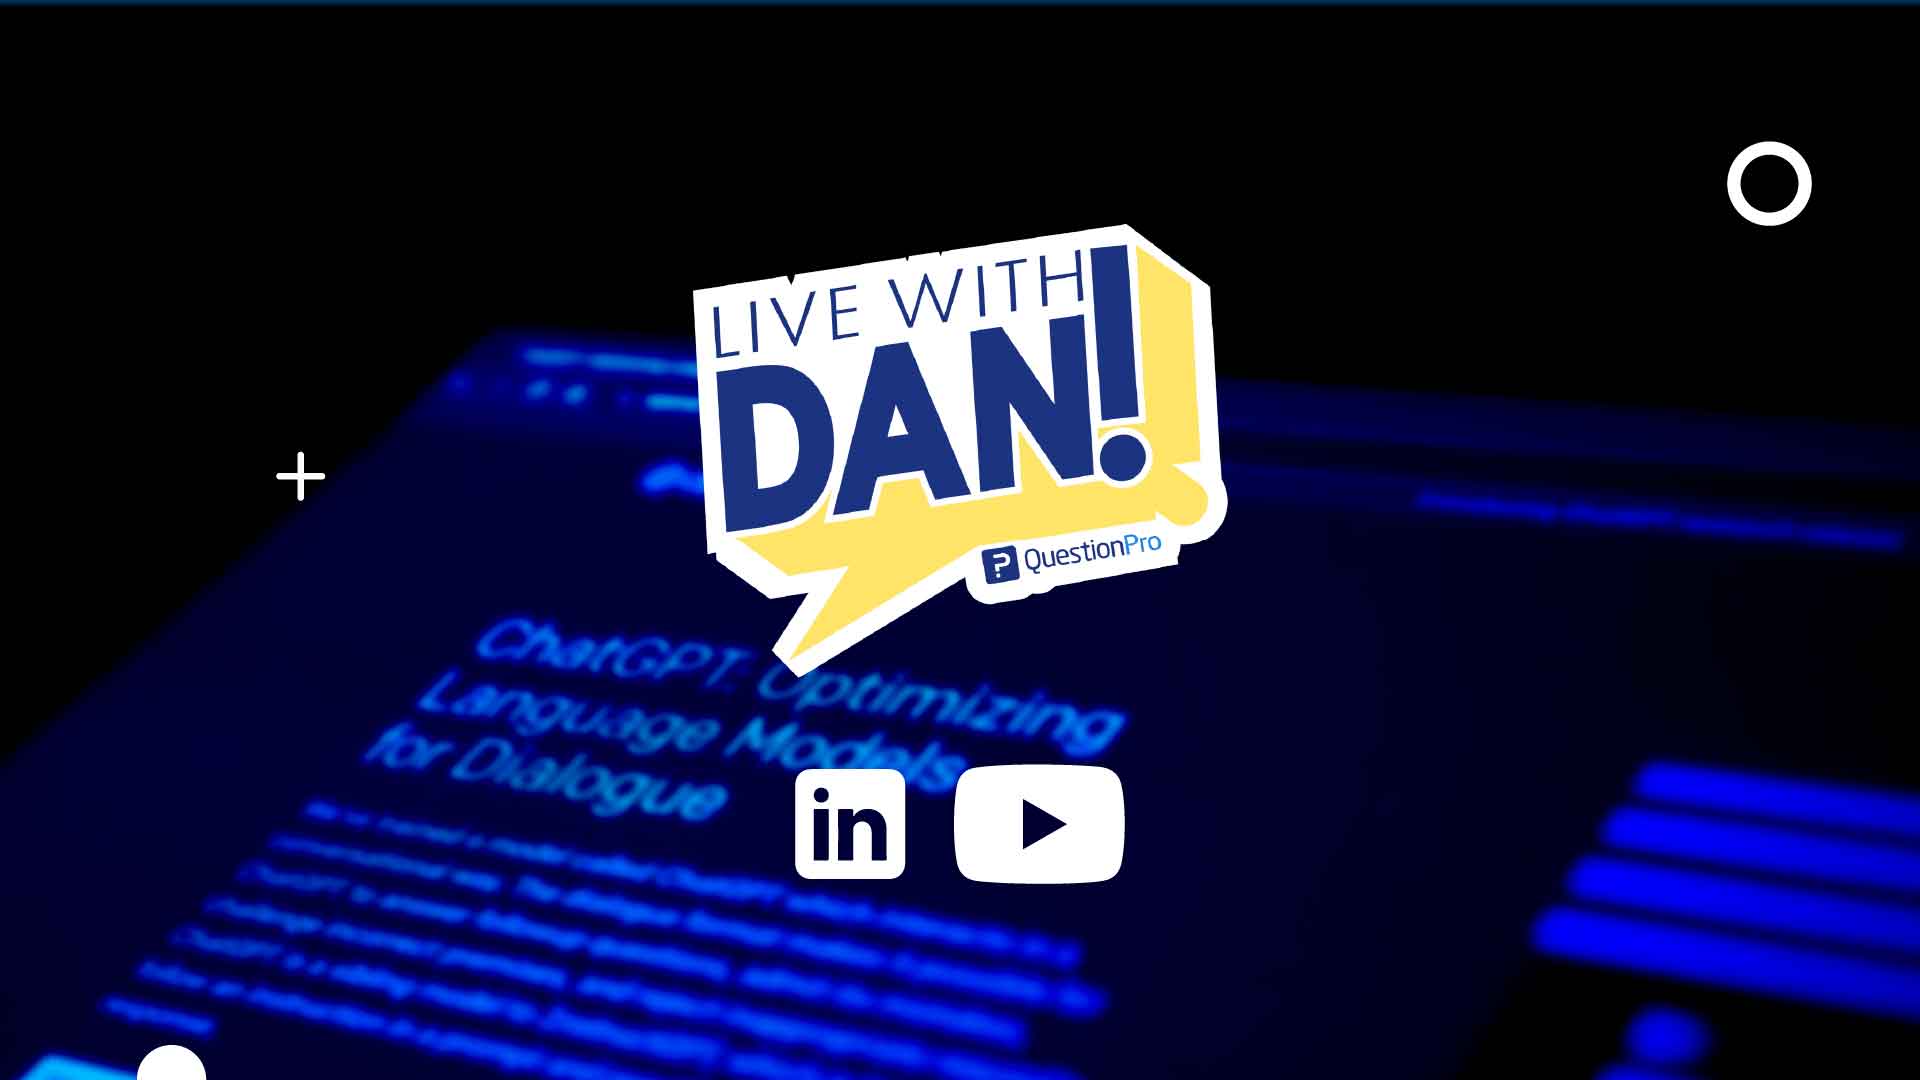 Live With Dan - The impact of ChatGPT on data quality in research and insights